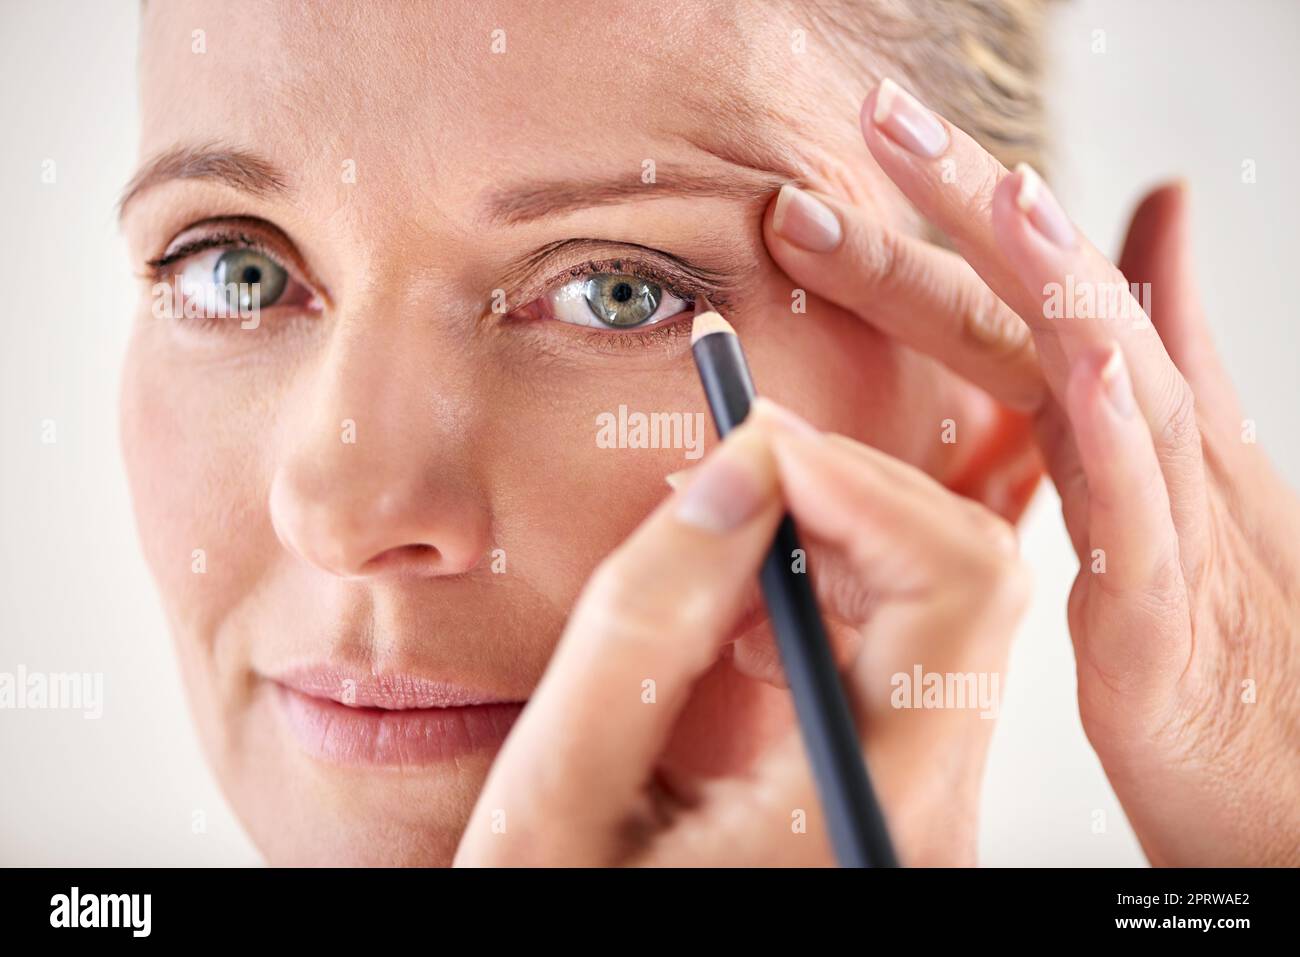 Making her best features stand out. Cropped studio shot of a mature woman applying eyeliner. Stock Photo